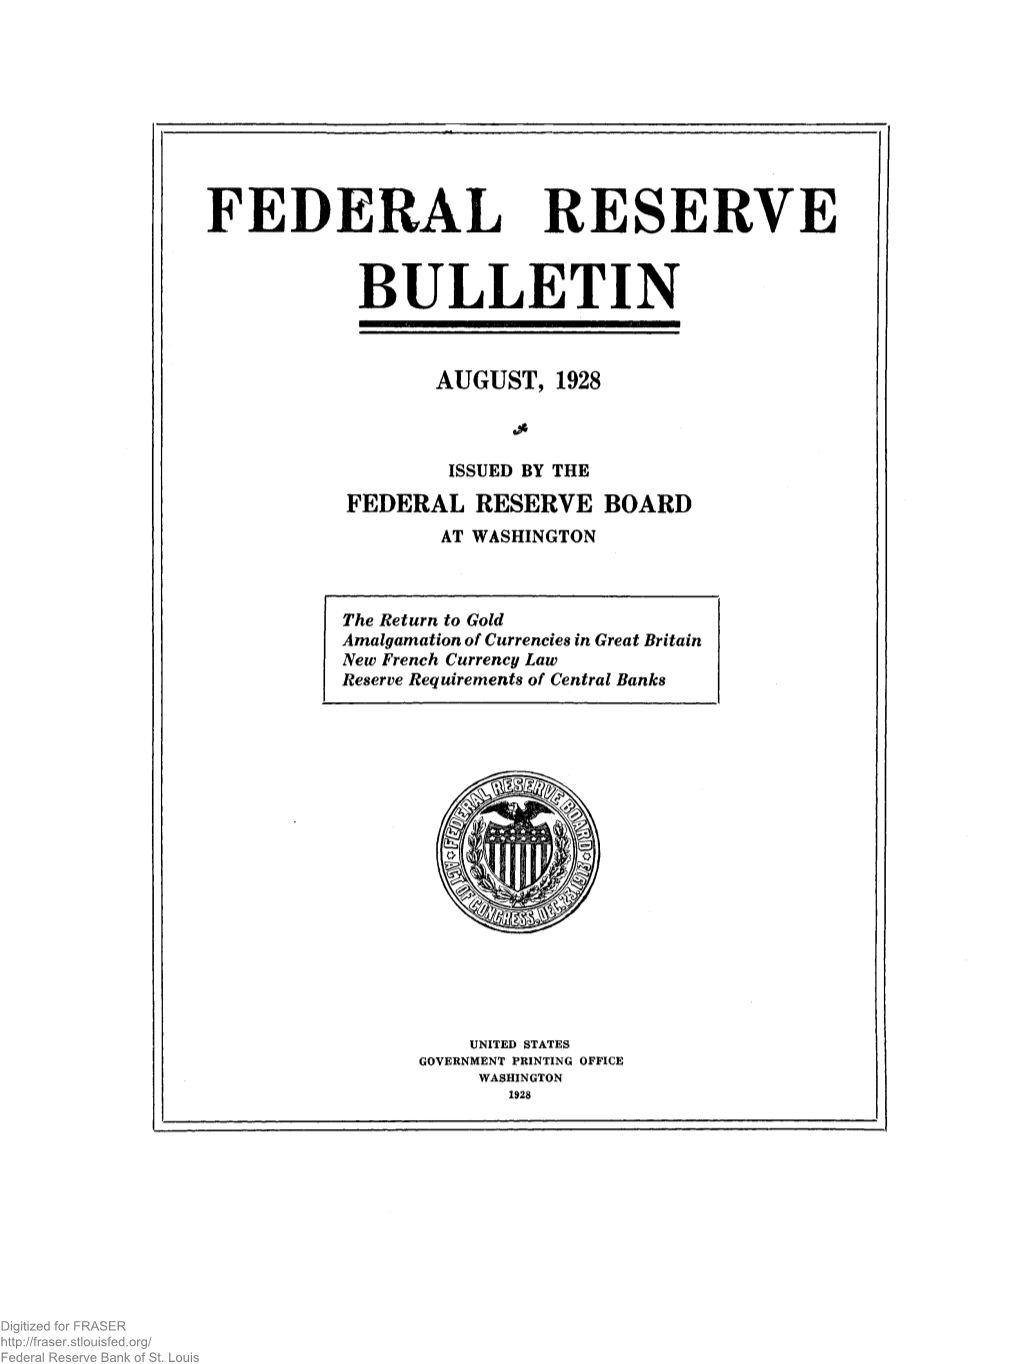 Federal Reserve Bulletin August 1928